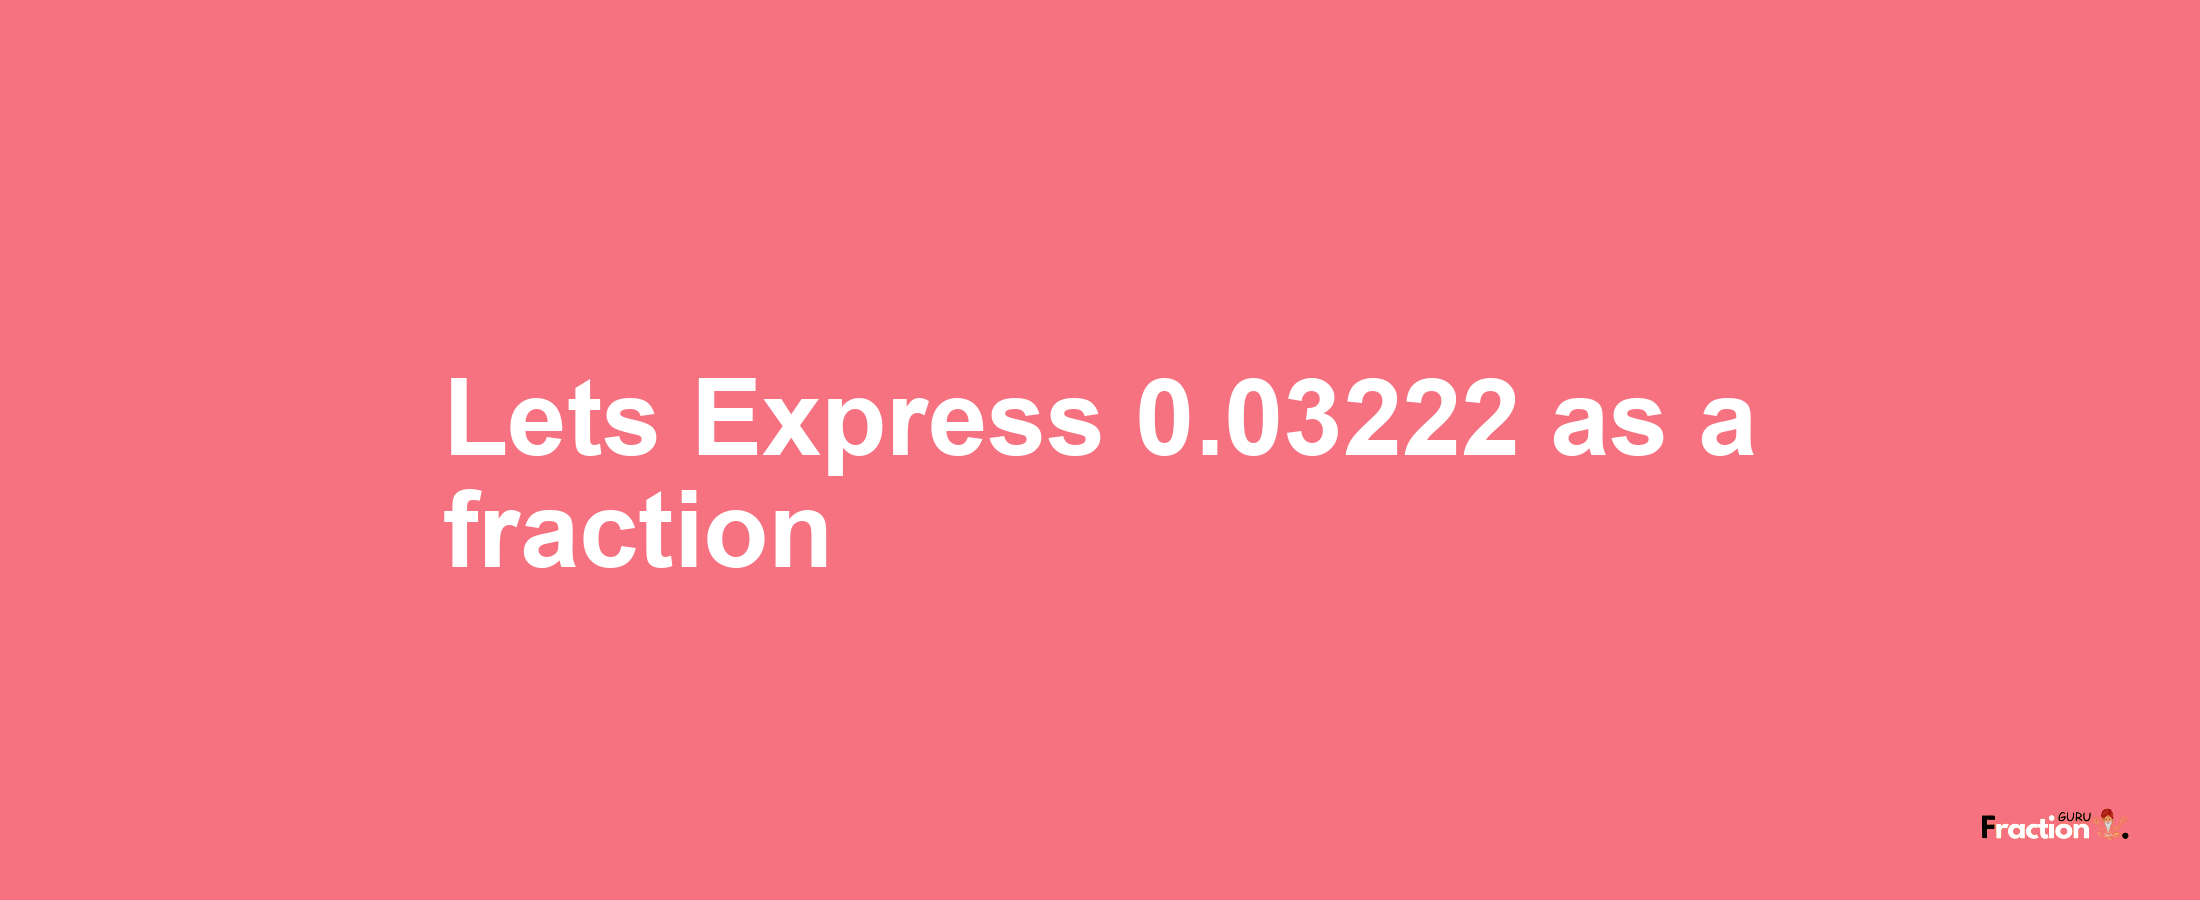 Lets Express 0.03222 as afraction